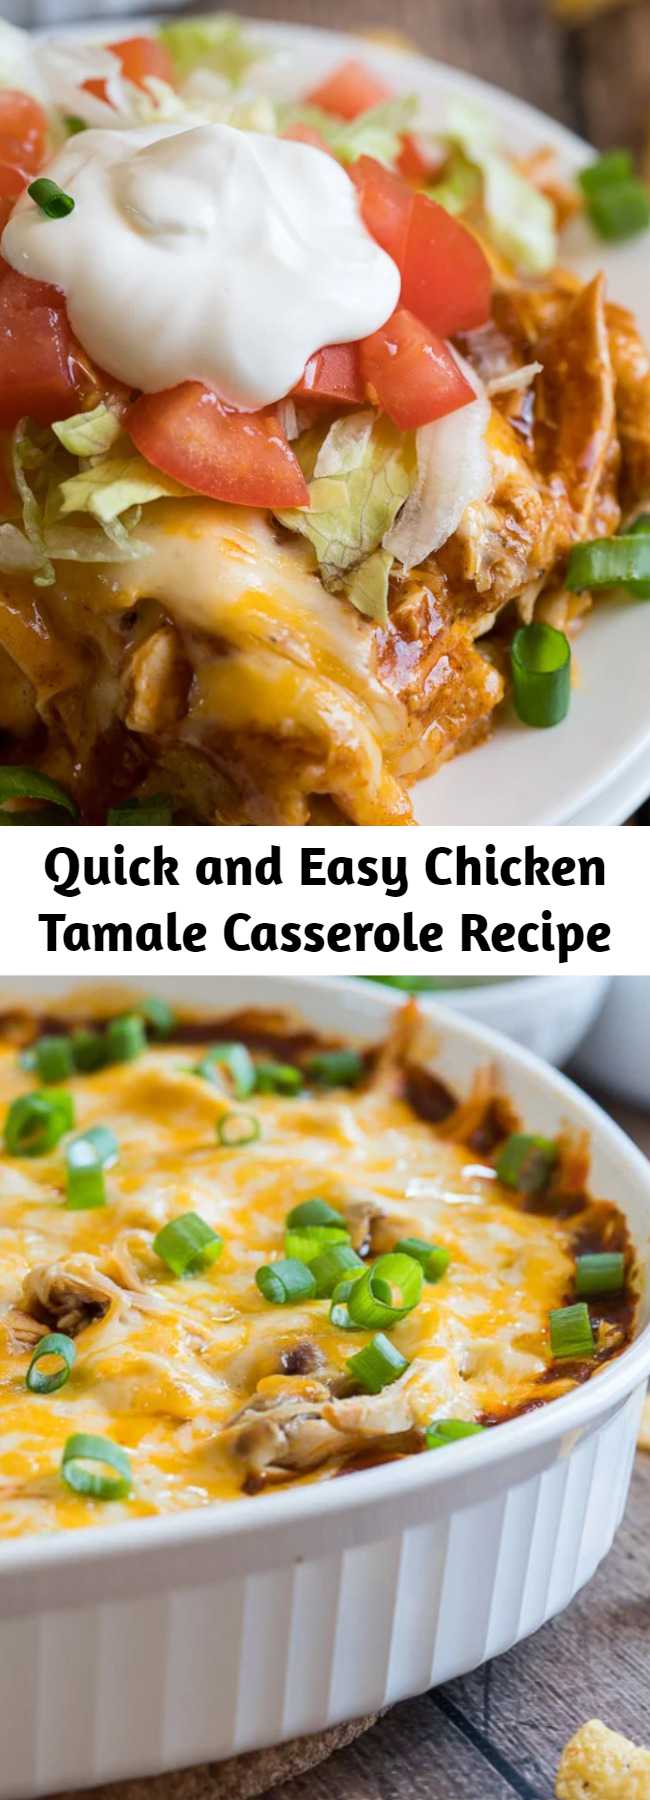 Quick and Easy Chicken Tamale Casserole Recipe - This cheesy Chicken Tamale Casserole is a quick and easy family weeknight dinner that has all the flavors of classic tamales without all the fuss!